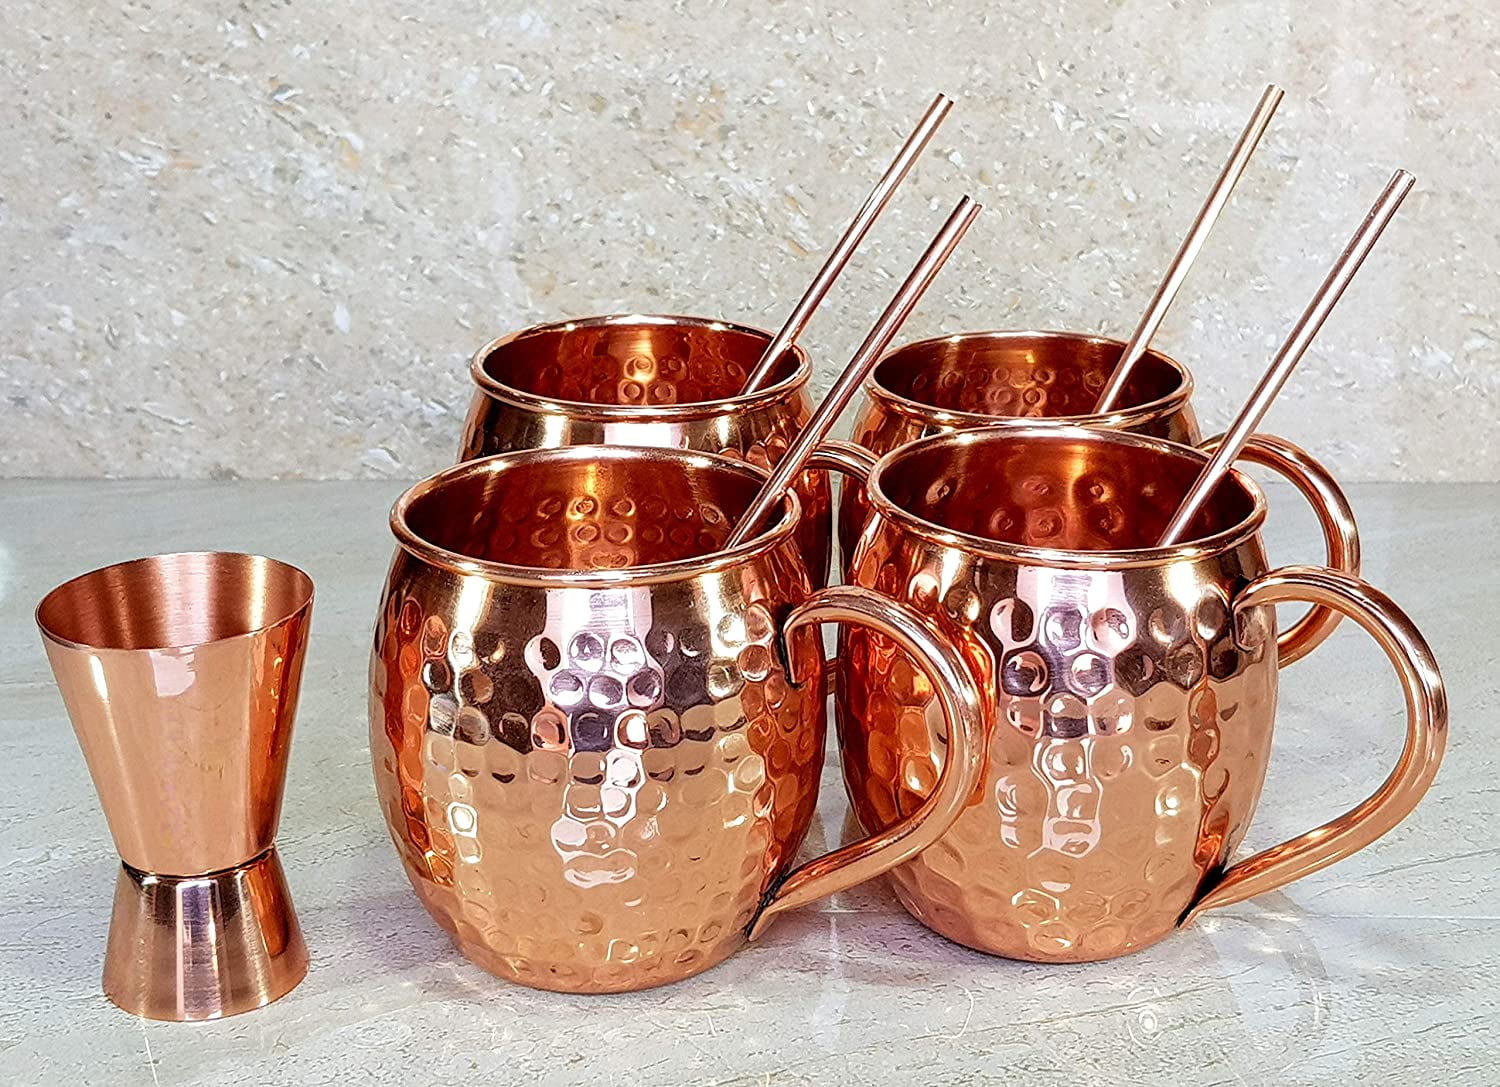 MOSCOW MULE COPPER MUGS Set of 2 100% HANDCRAFTED Food Safe Pure Solid Copper 